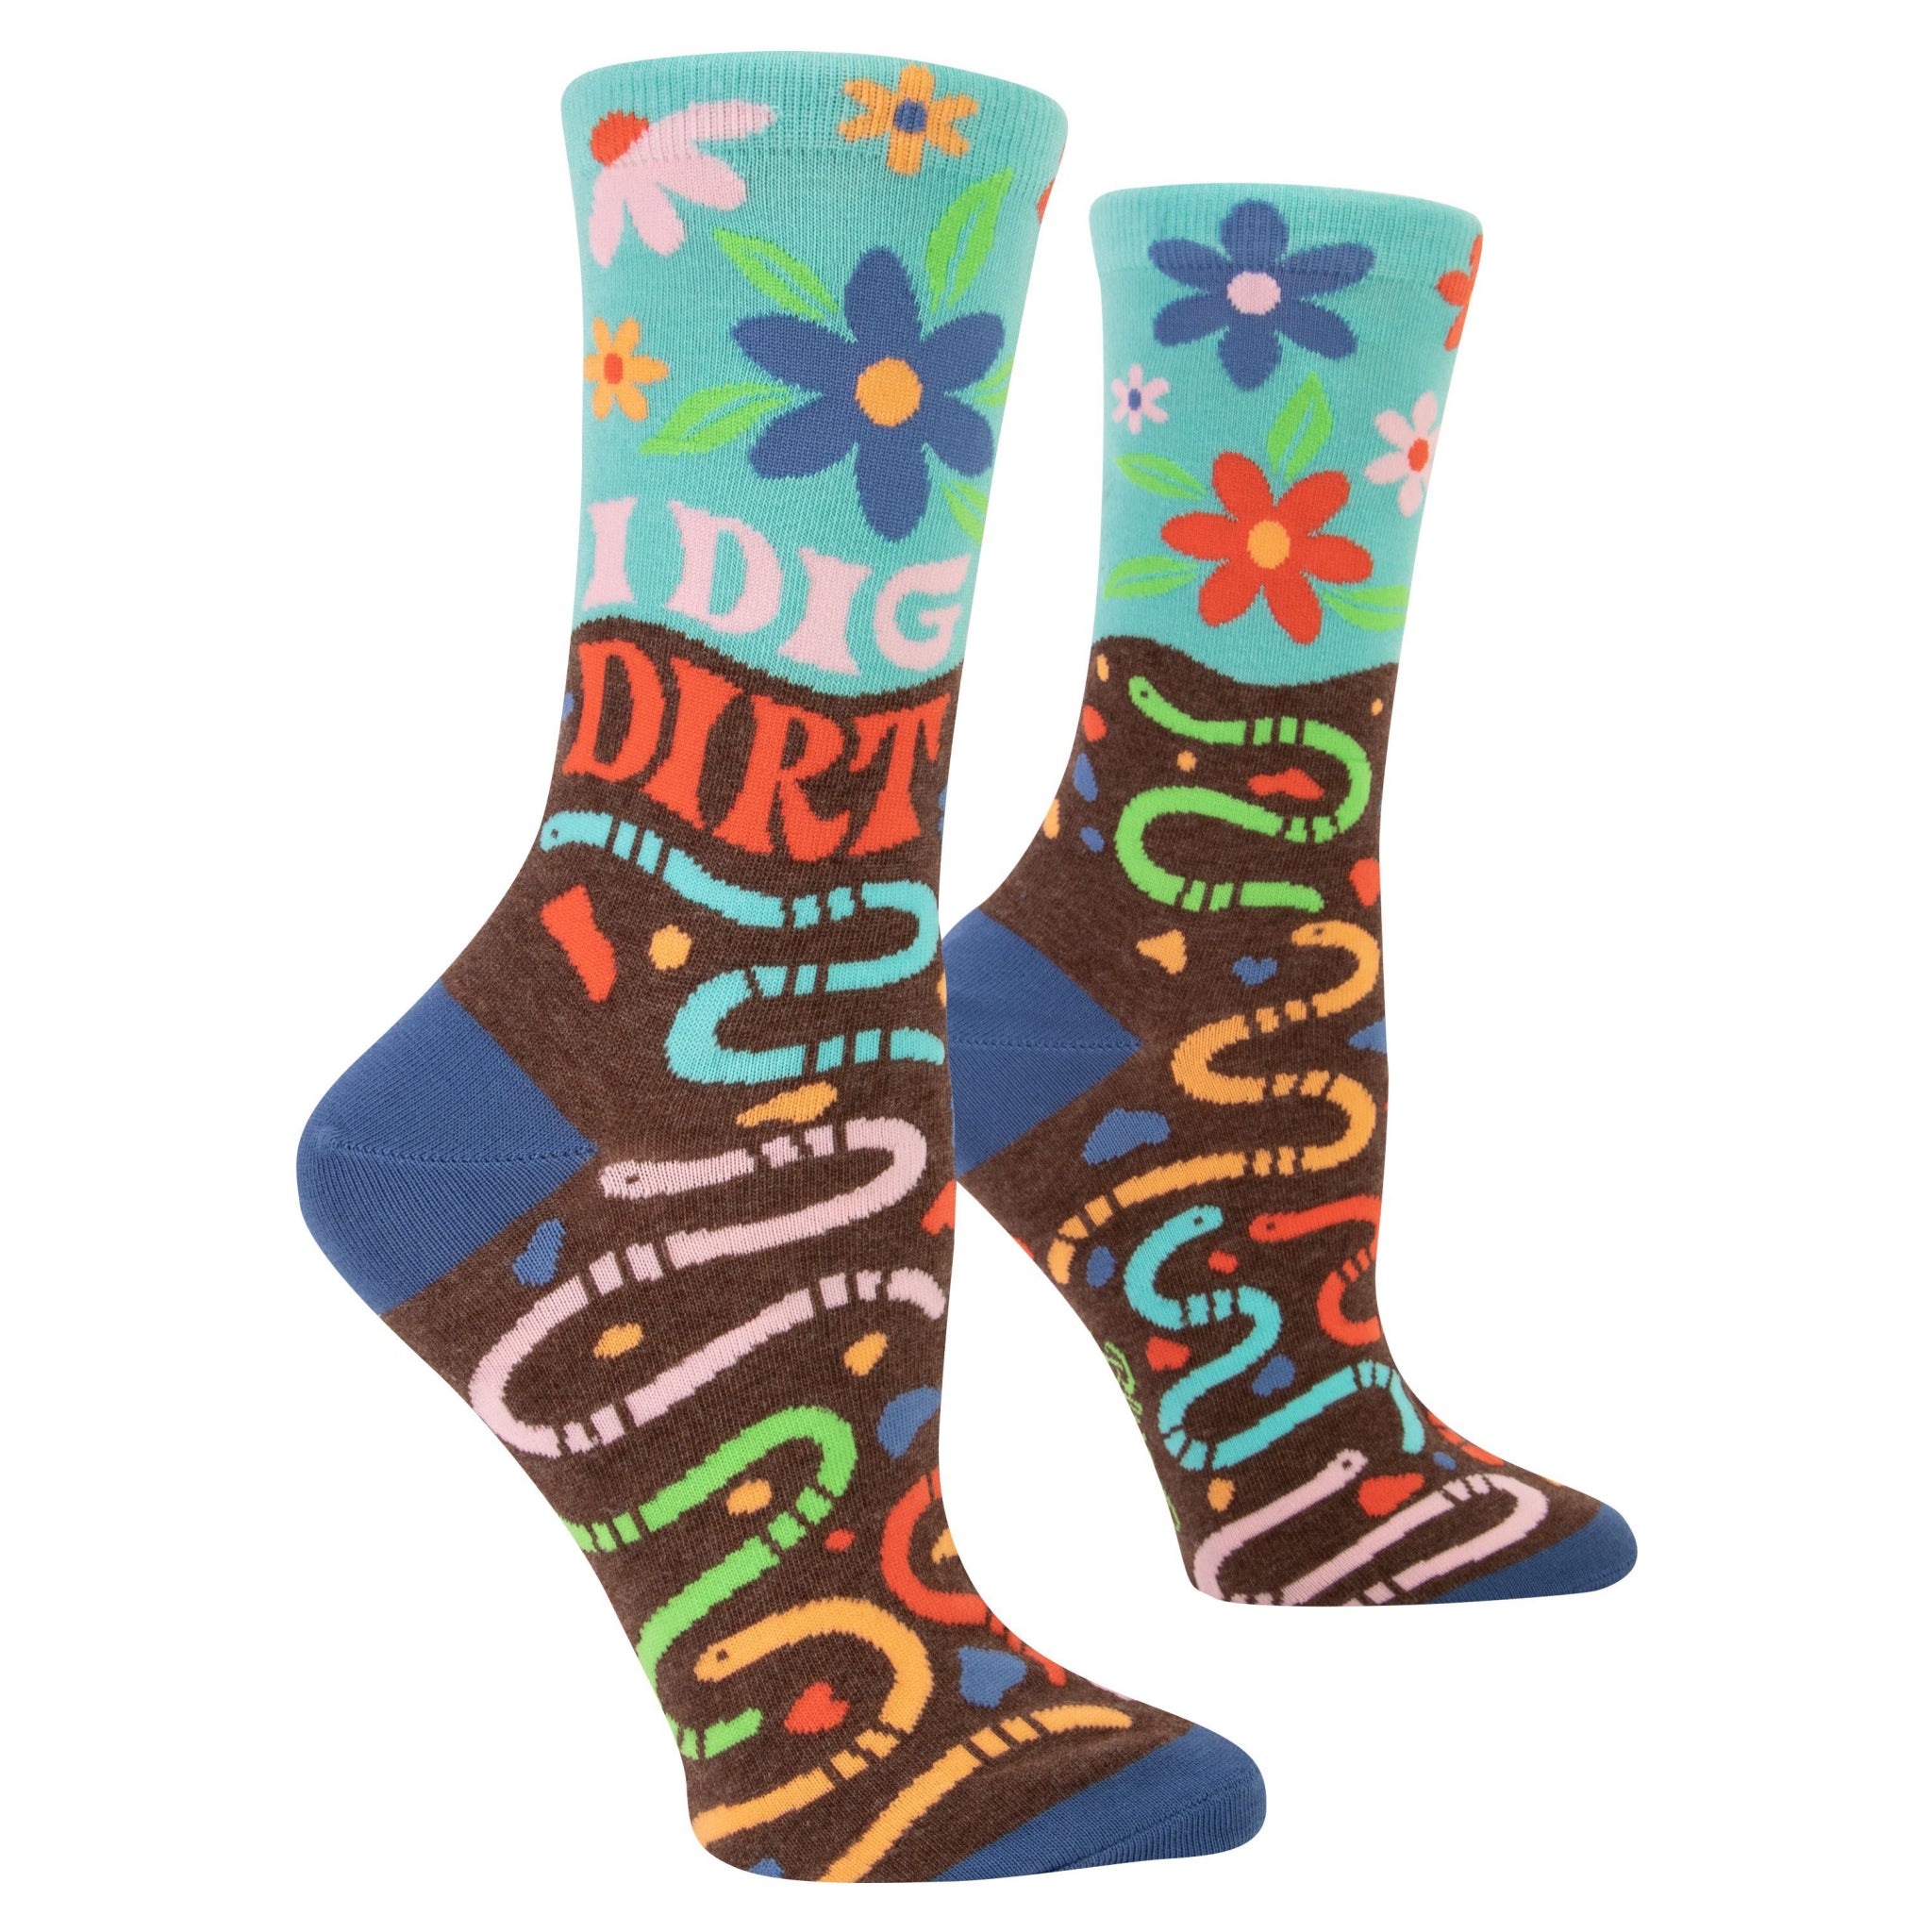 I Dig Dirt Crew Socks | Blue Q – Outer Layer